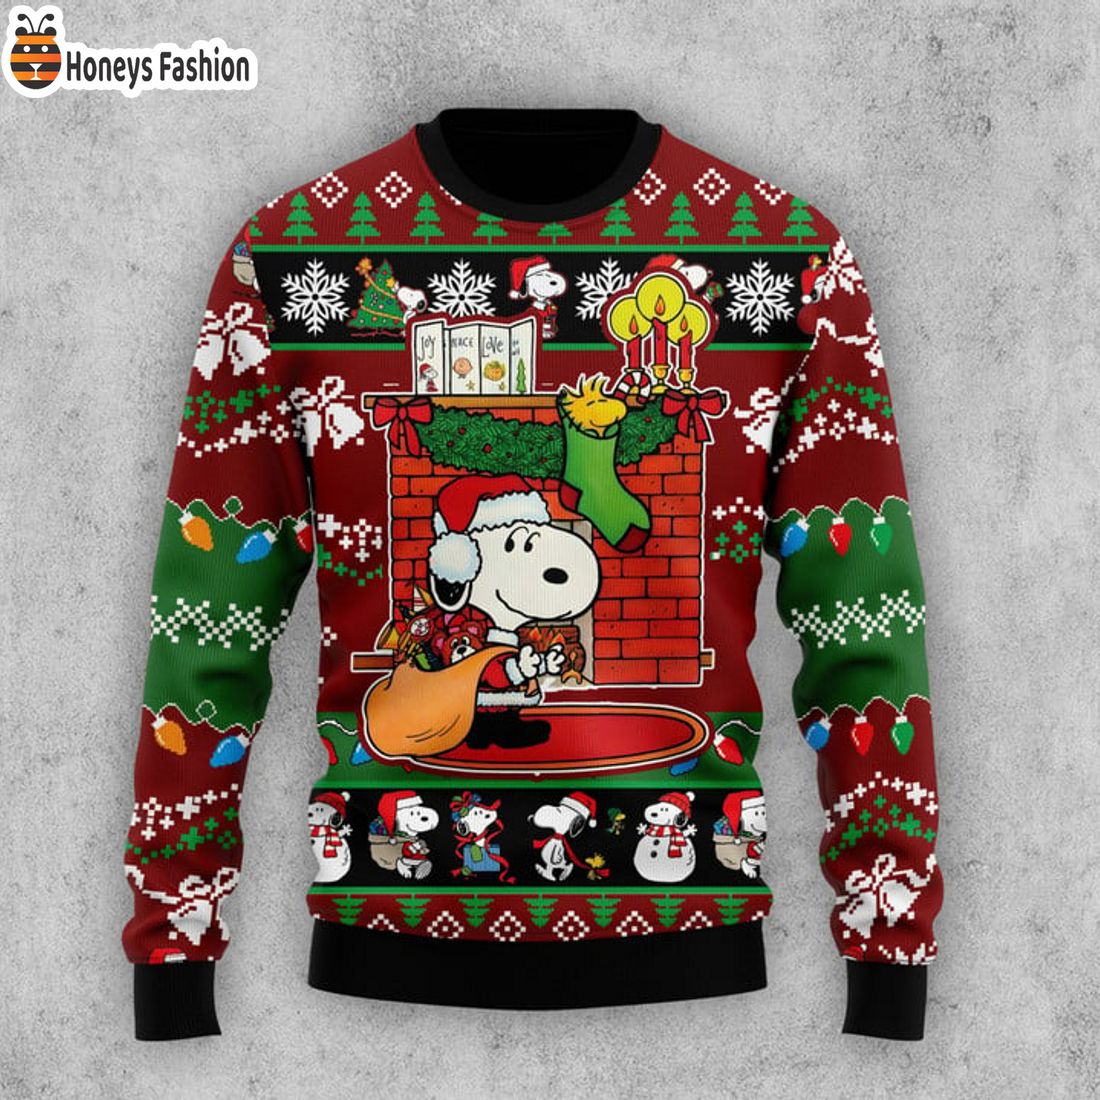 TRENDING The Peanuts Snoopy A Charlie Brown Ugly Christmas Sweater